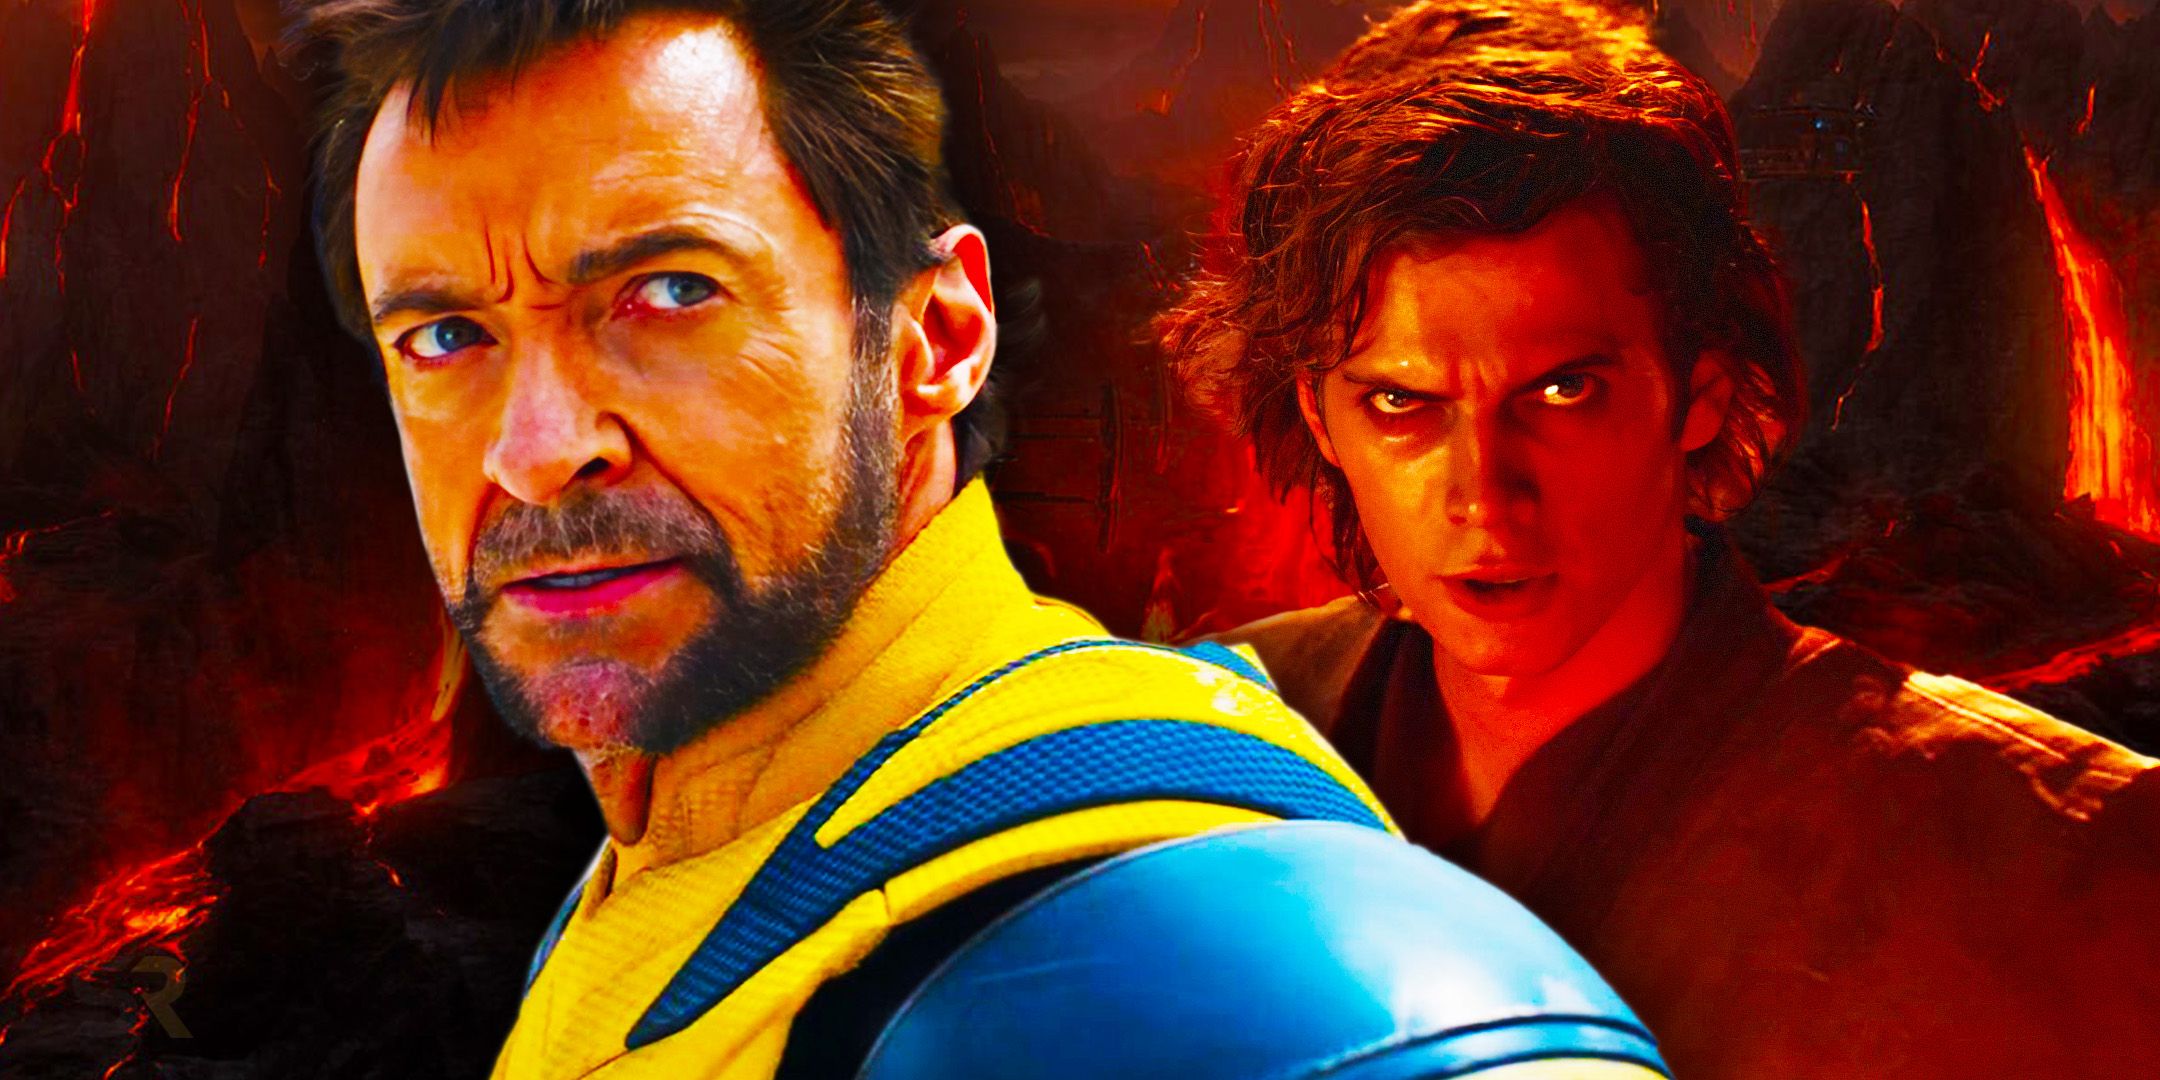 Hugh Jackman as Wolverine to the left and Anakin Skywalker on Mustafar to the right in a combined image